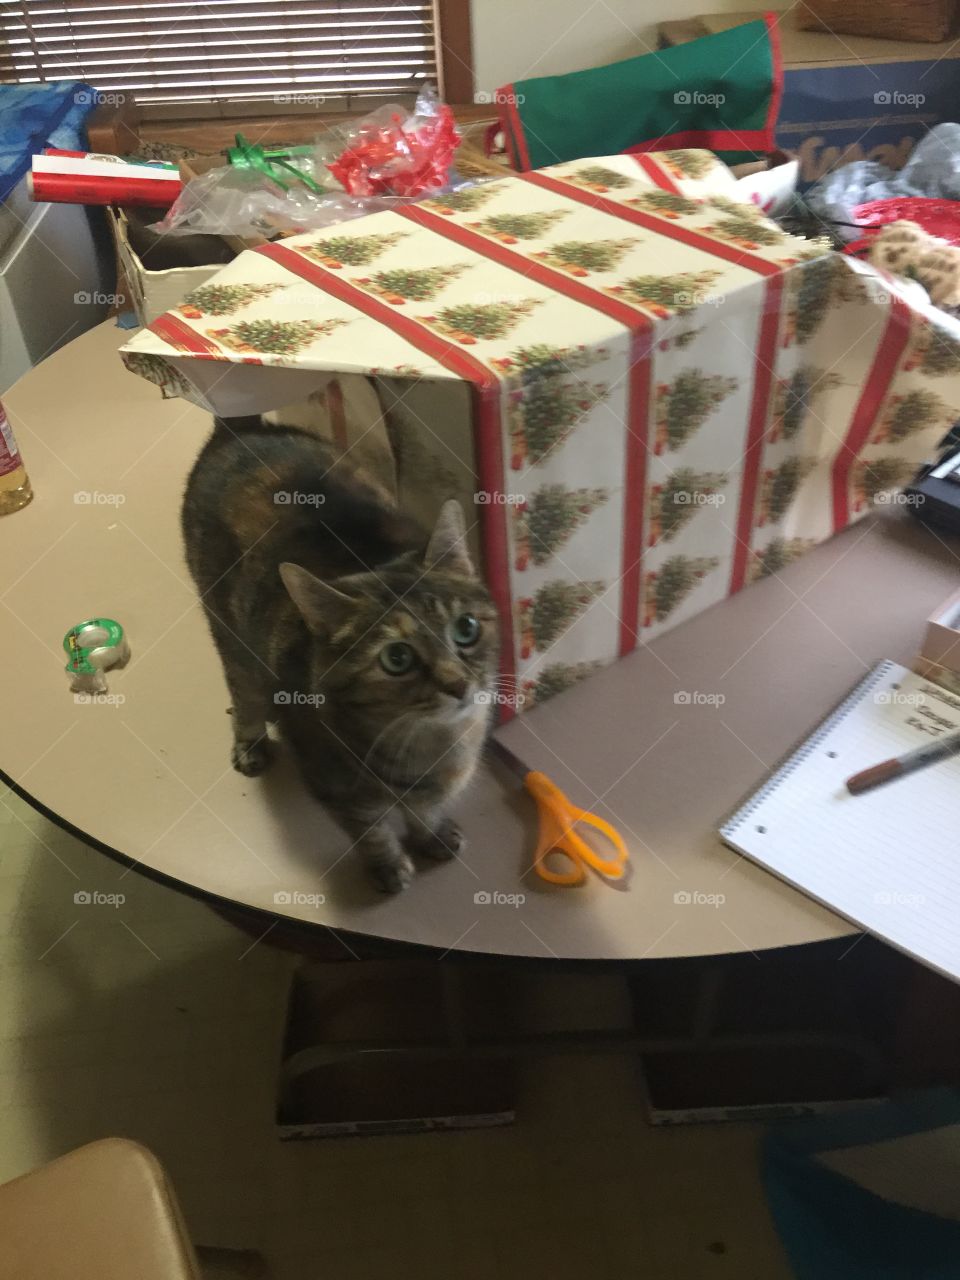 Wrapping presents